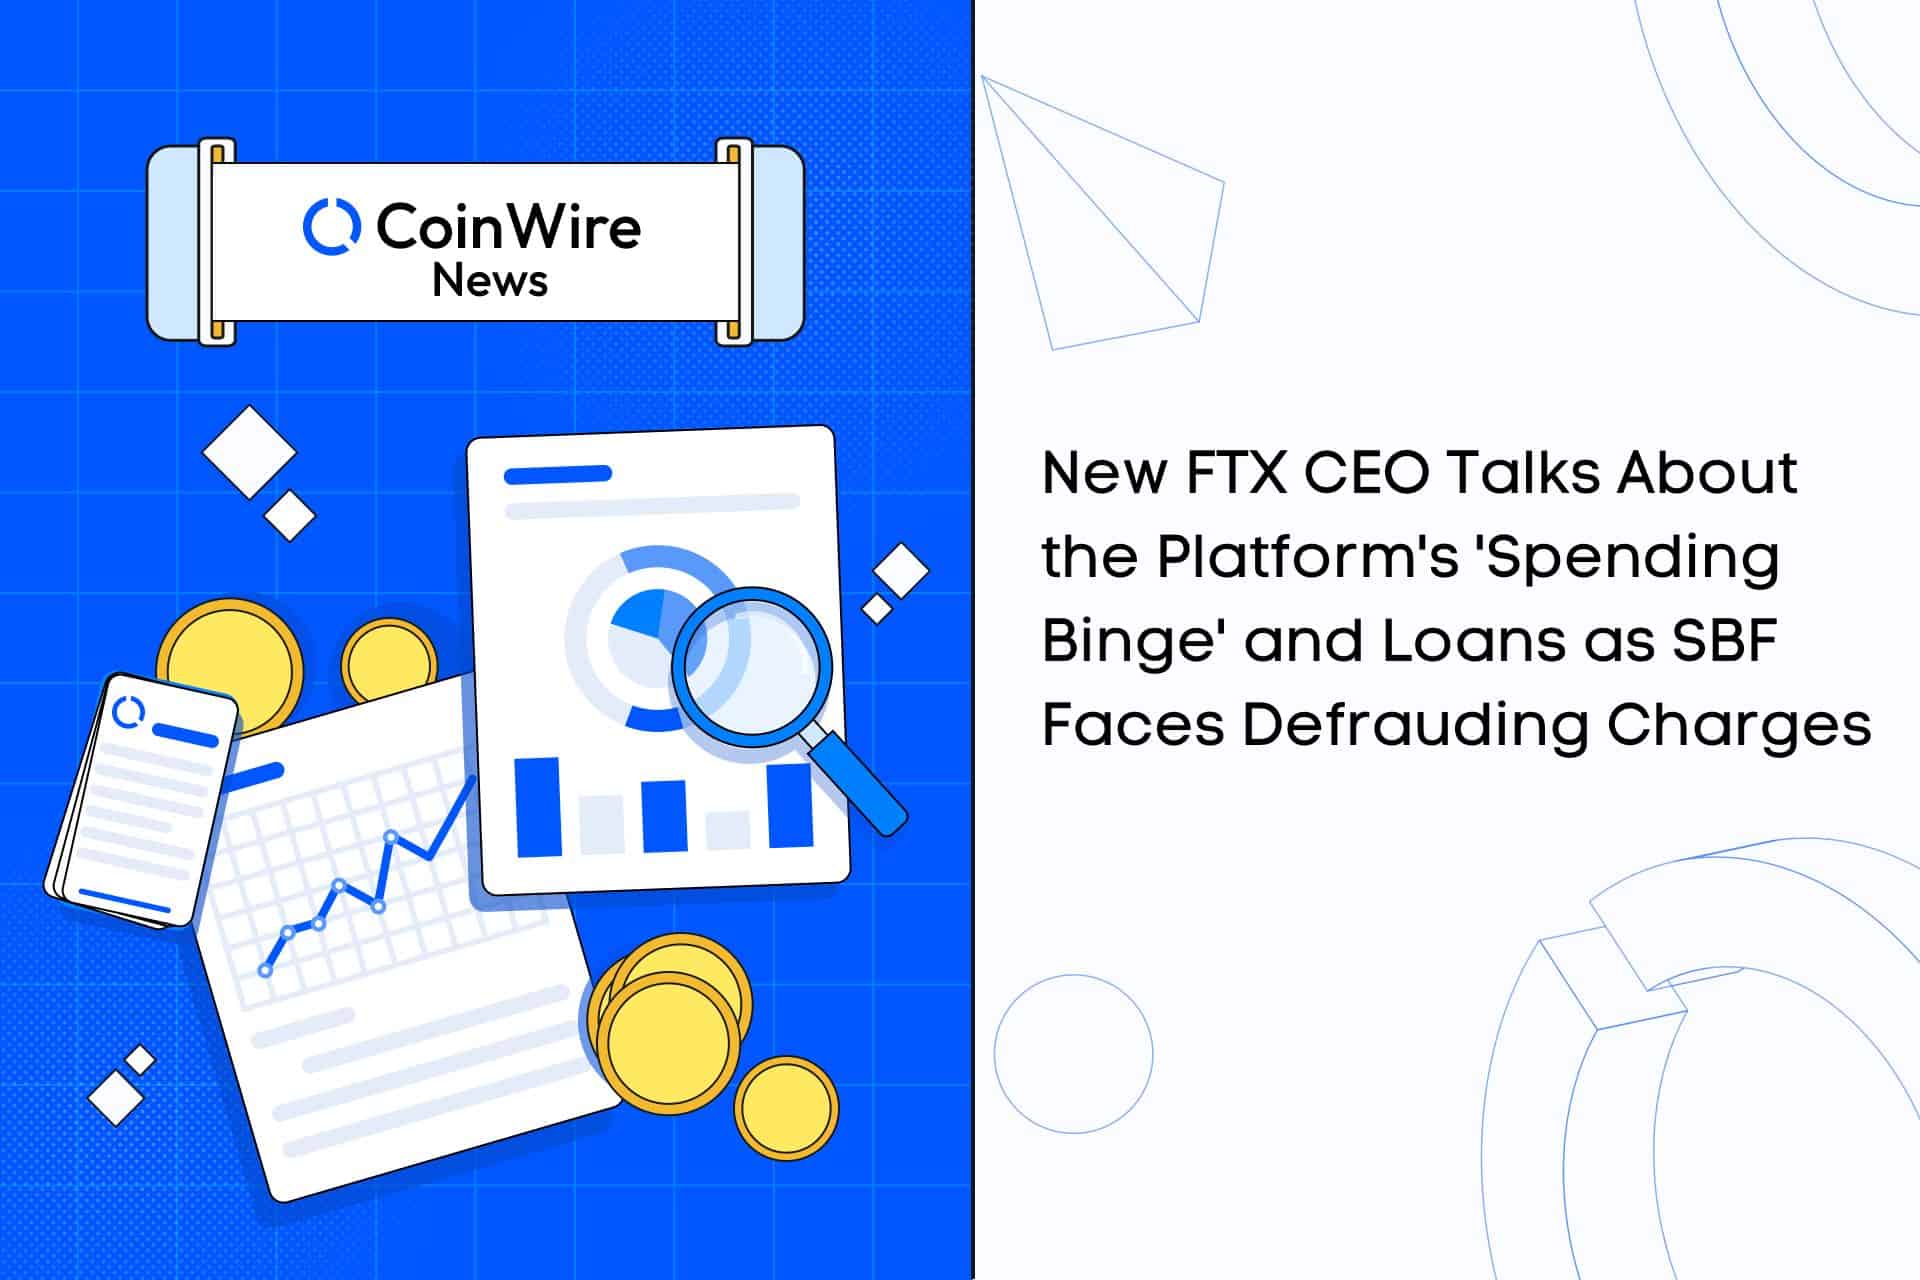 New Ftx Ceo Talks About The Platform'S 'Spending Binge' And Loans As Sbf Faces Defrauding Charges